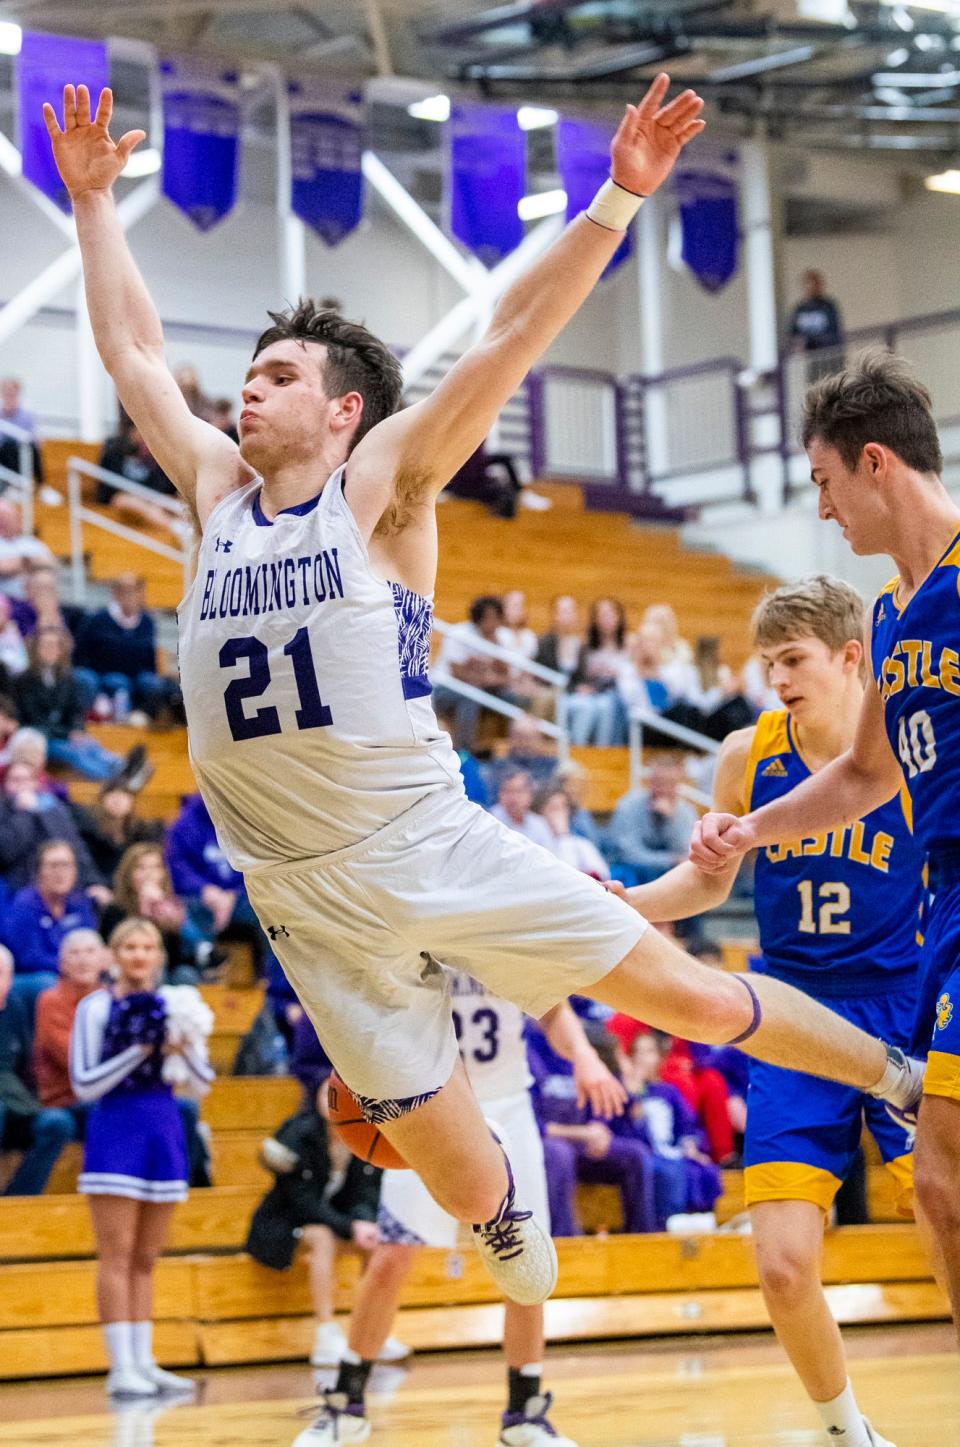 South's Zach Sims (21) soars after being fouled during the Bloomington South versus Castle boys basketball game at Bloomington High School South on Friday, Jan. 20, 2023.